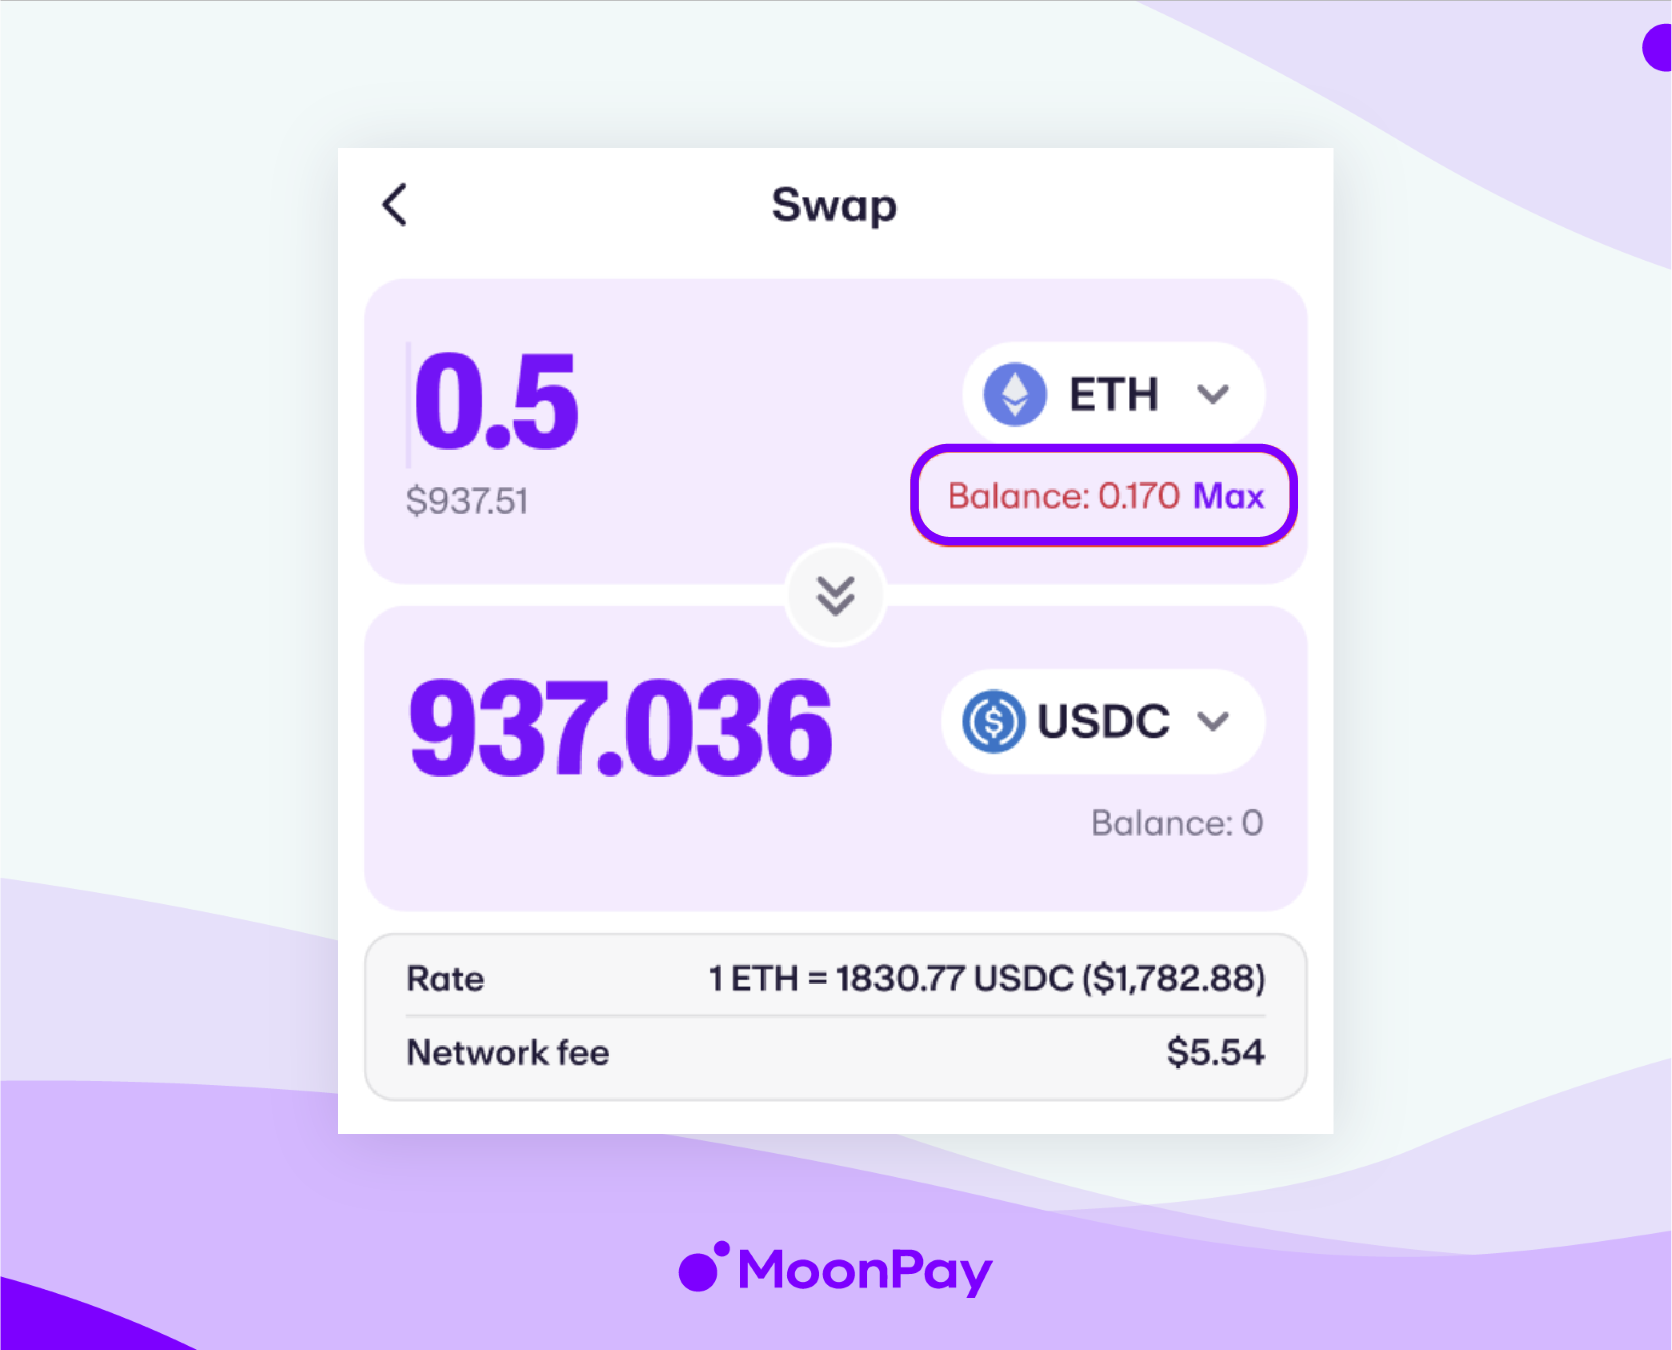 MoonPay app's window shows the amount inputted exceeds the actual balance.